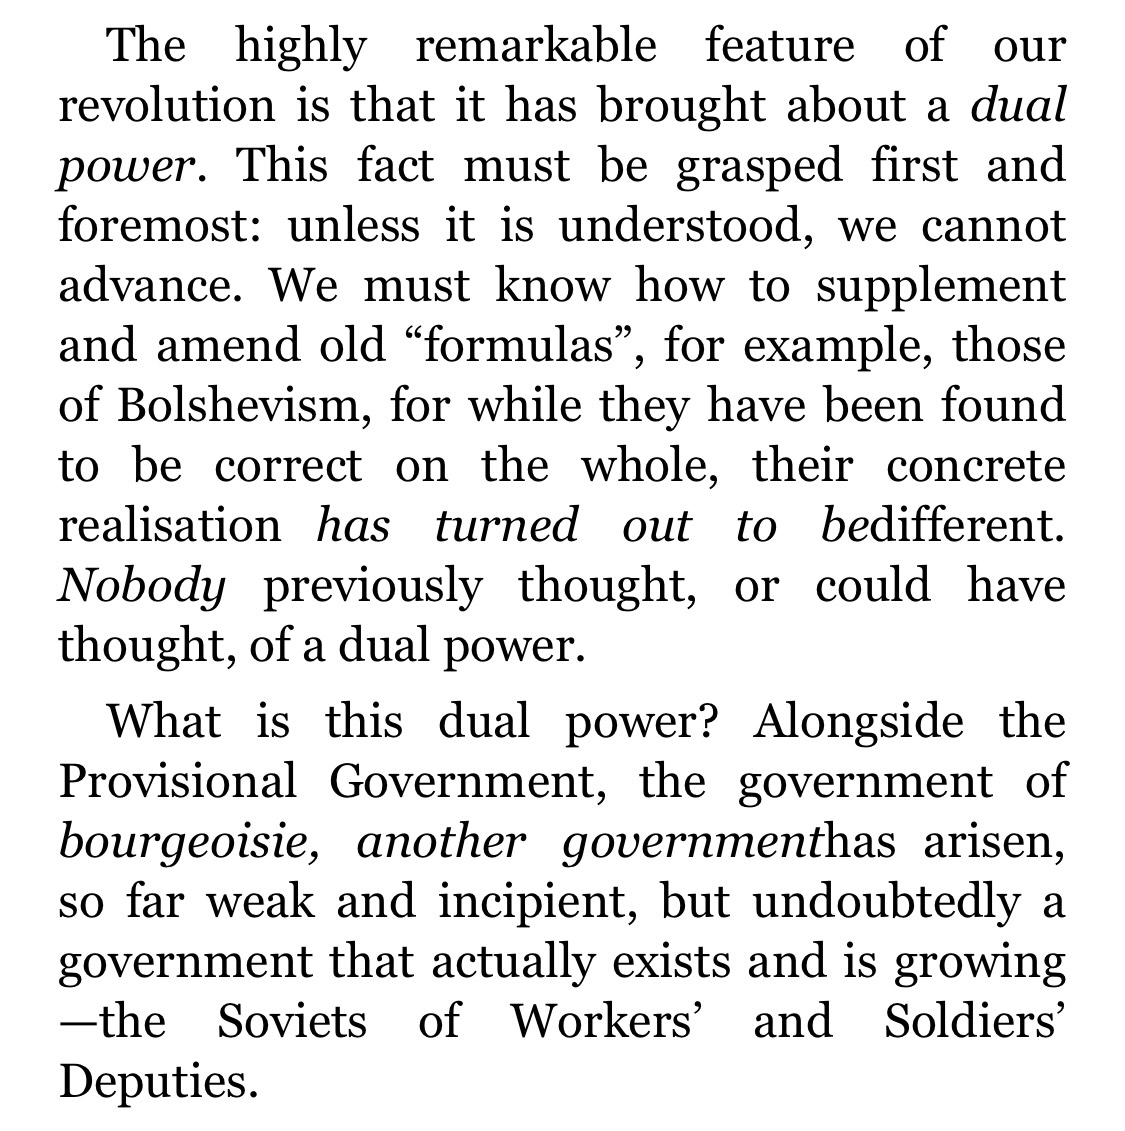 When Lenin stated, “Nobody previously thought, or could have thought, of a dual power,” this couldn’t have been further from the truth.Anarchists had spoken to the broader, bottom-up dynamics he was observing for decades already.See 1917 Lenin (1) and 1851 Proudhon (2) below.